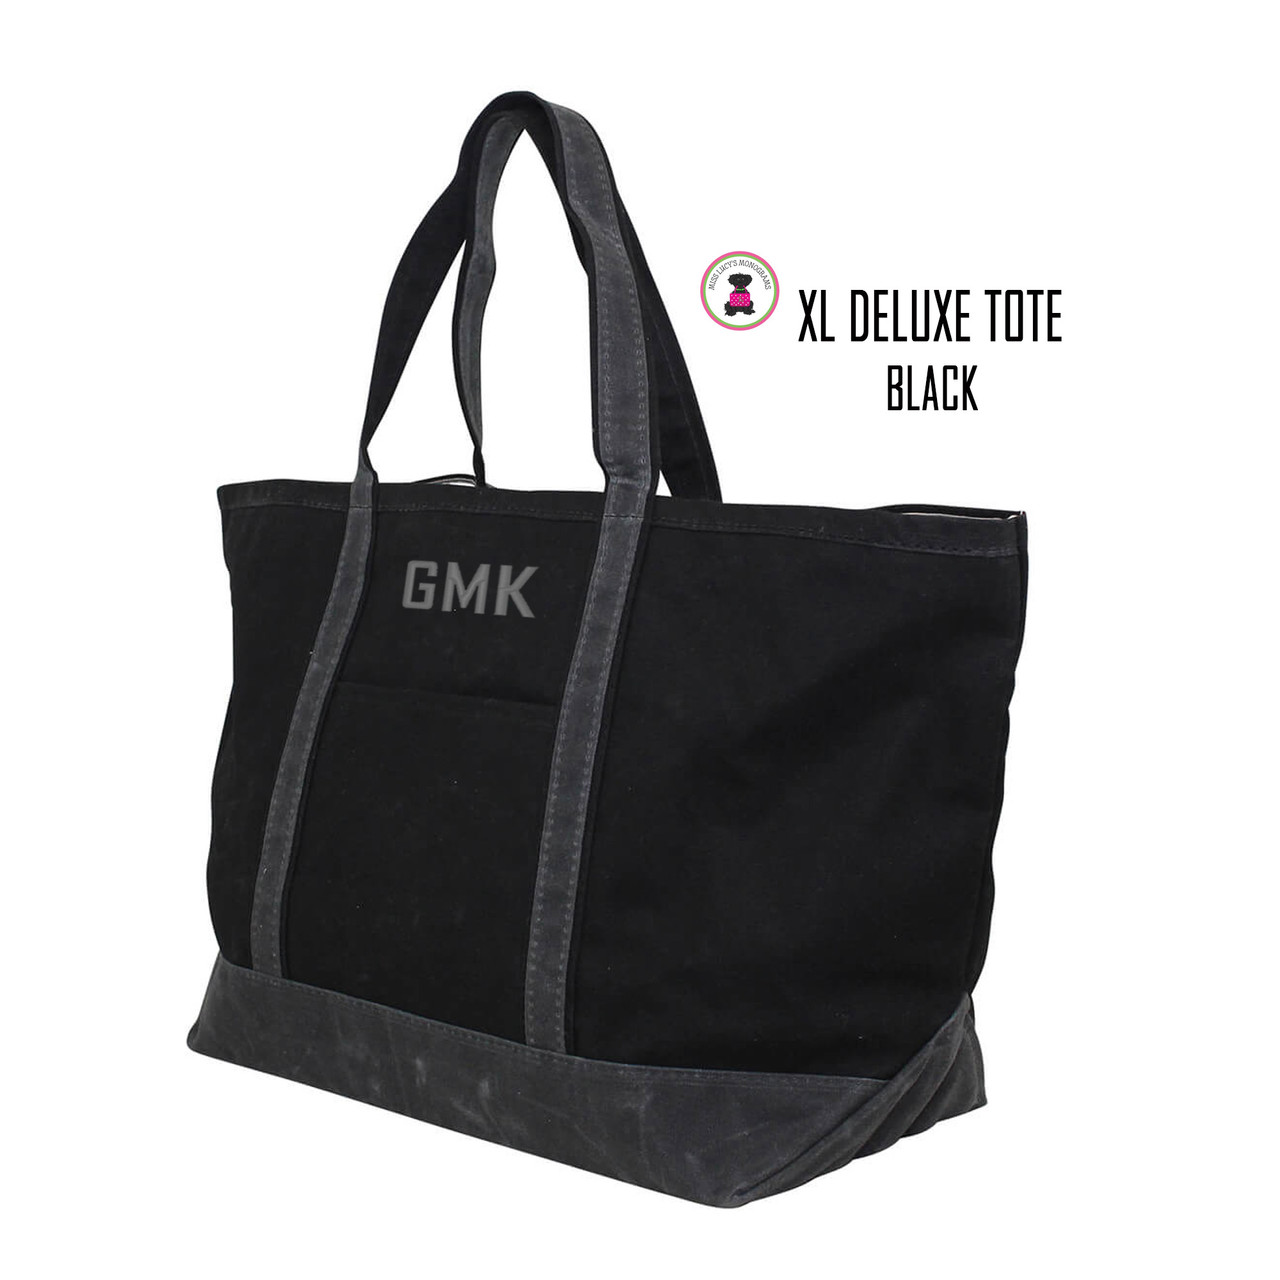 FOR HIM Monogrammed XLarge Waxed Canvas Deluxe Boat Tote -Black/Slate-Free  Ship/Men's Gift/Groomsmen Gift/Father's Day/Grad Gift/Weekender